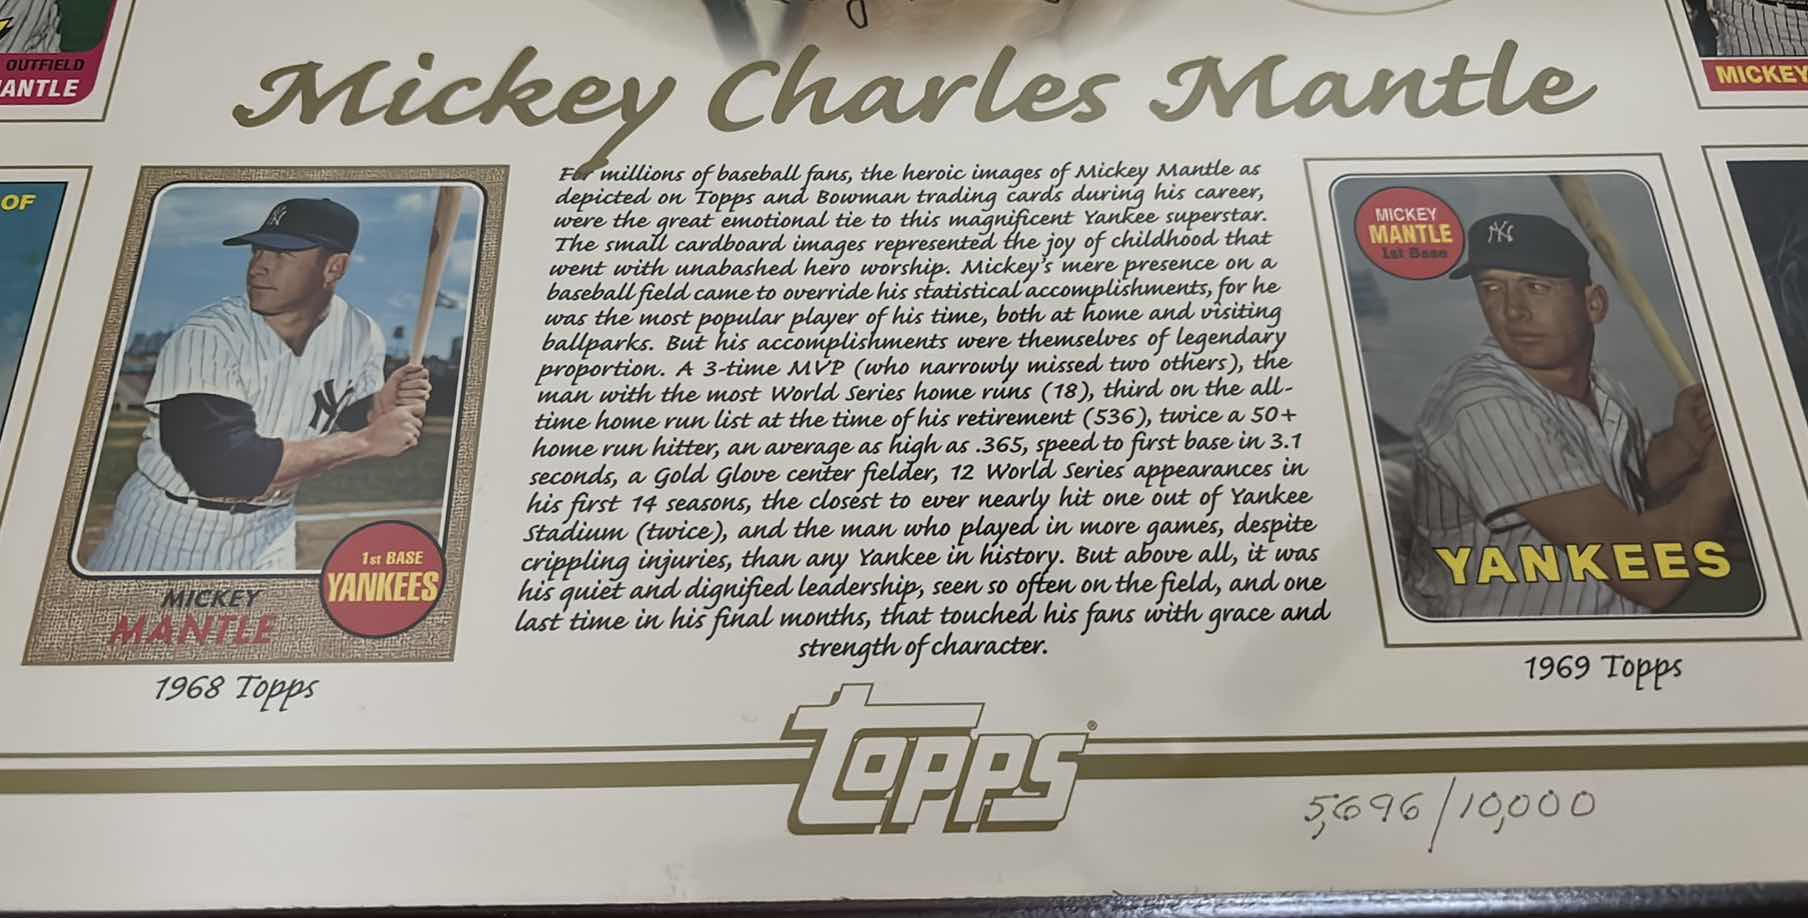 Photo 3 of FRAMED TOPPS MICKEY CHARLES MANTLE COMMEMORATIVE CARD SHEET W COA INCLUDED